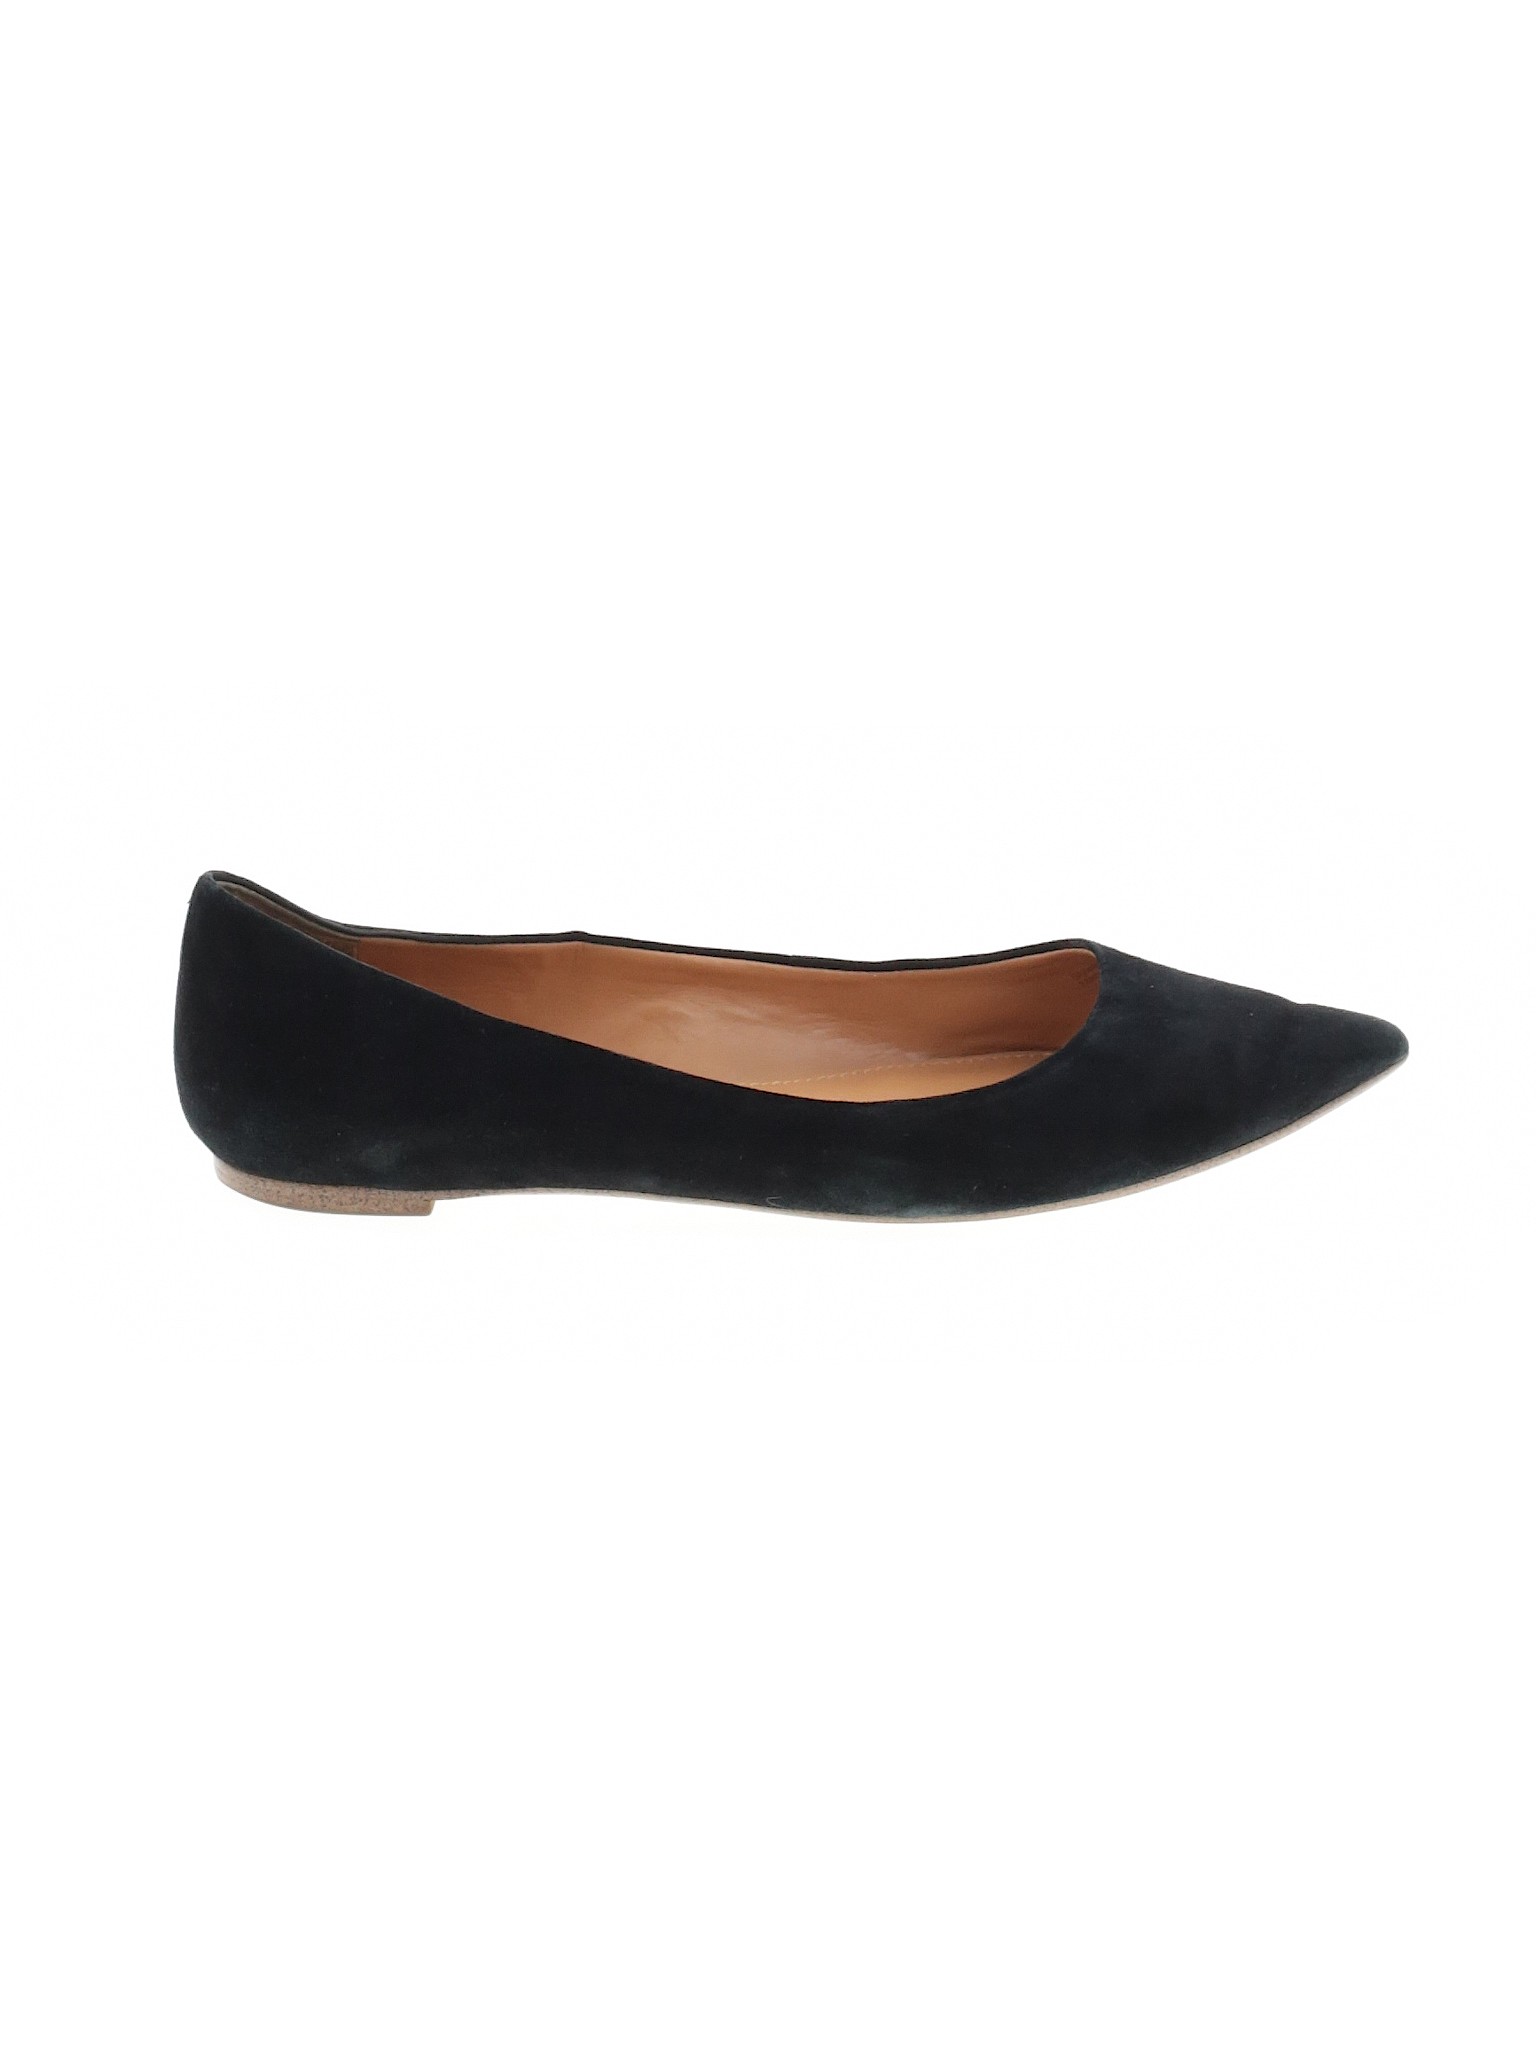 black flats in store